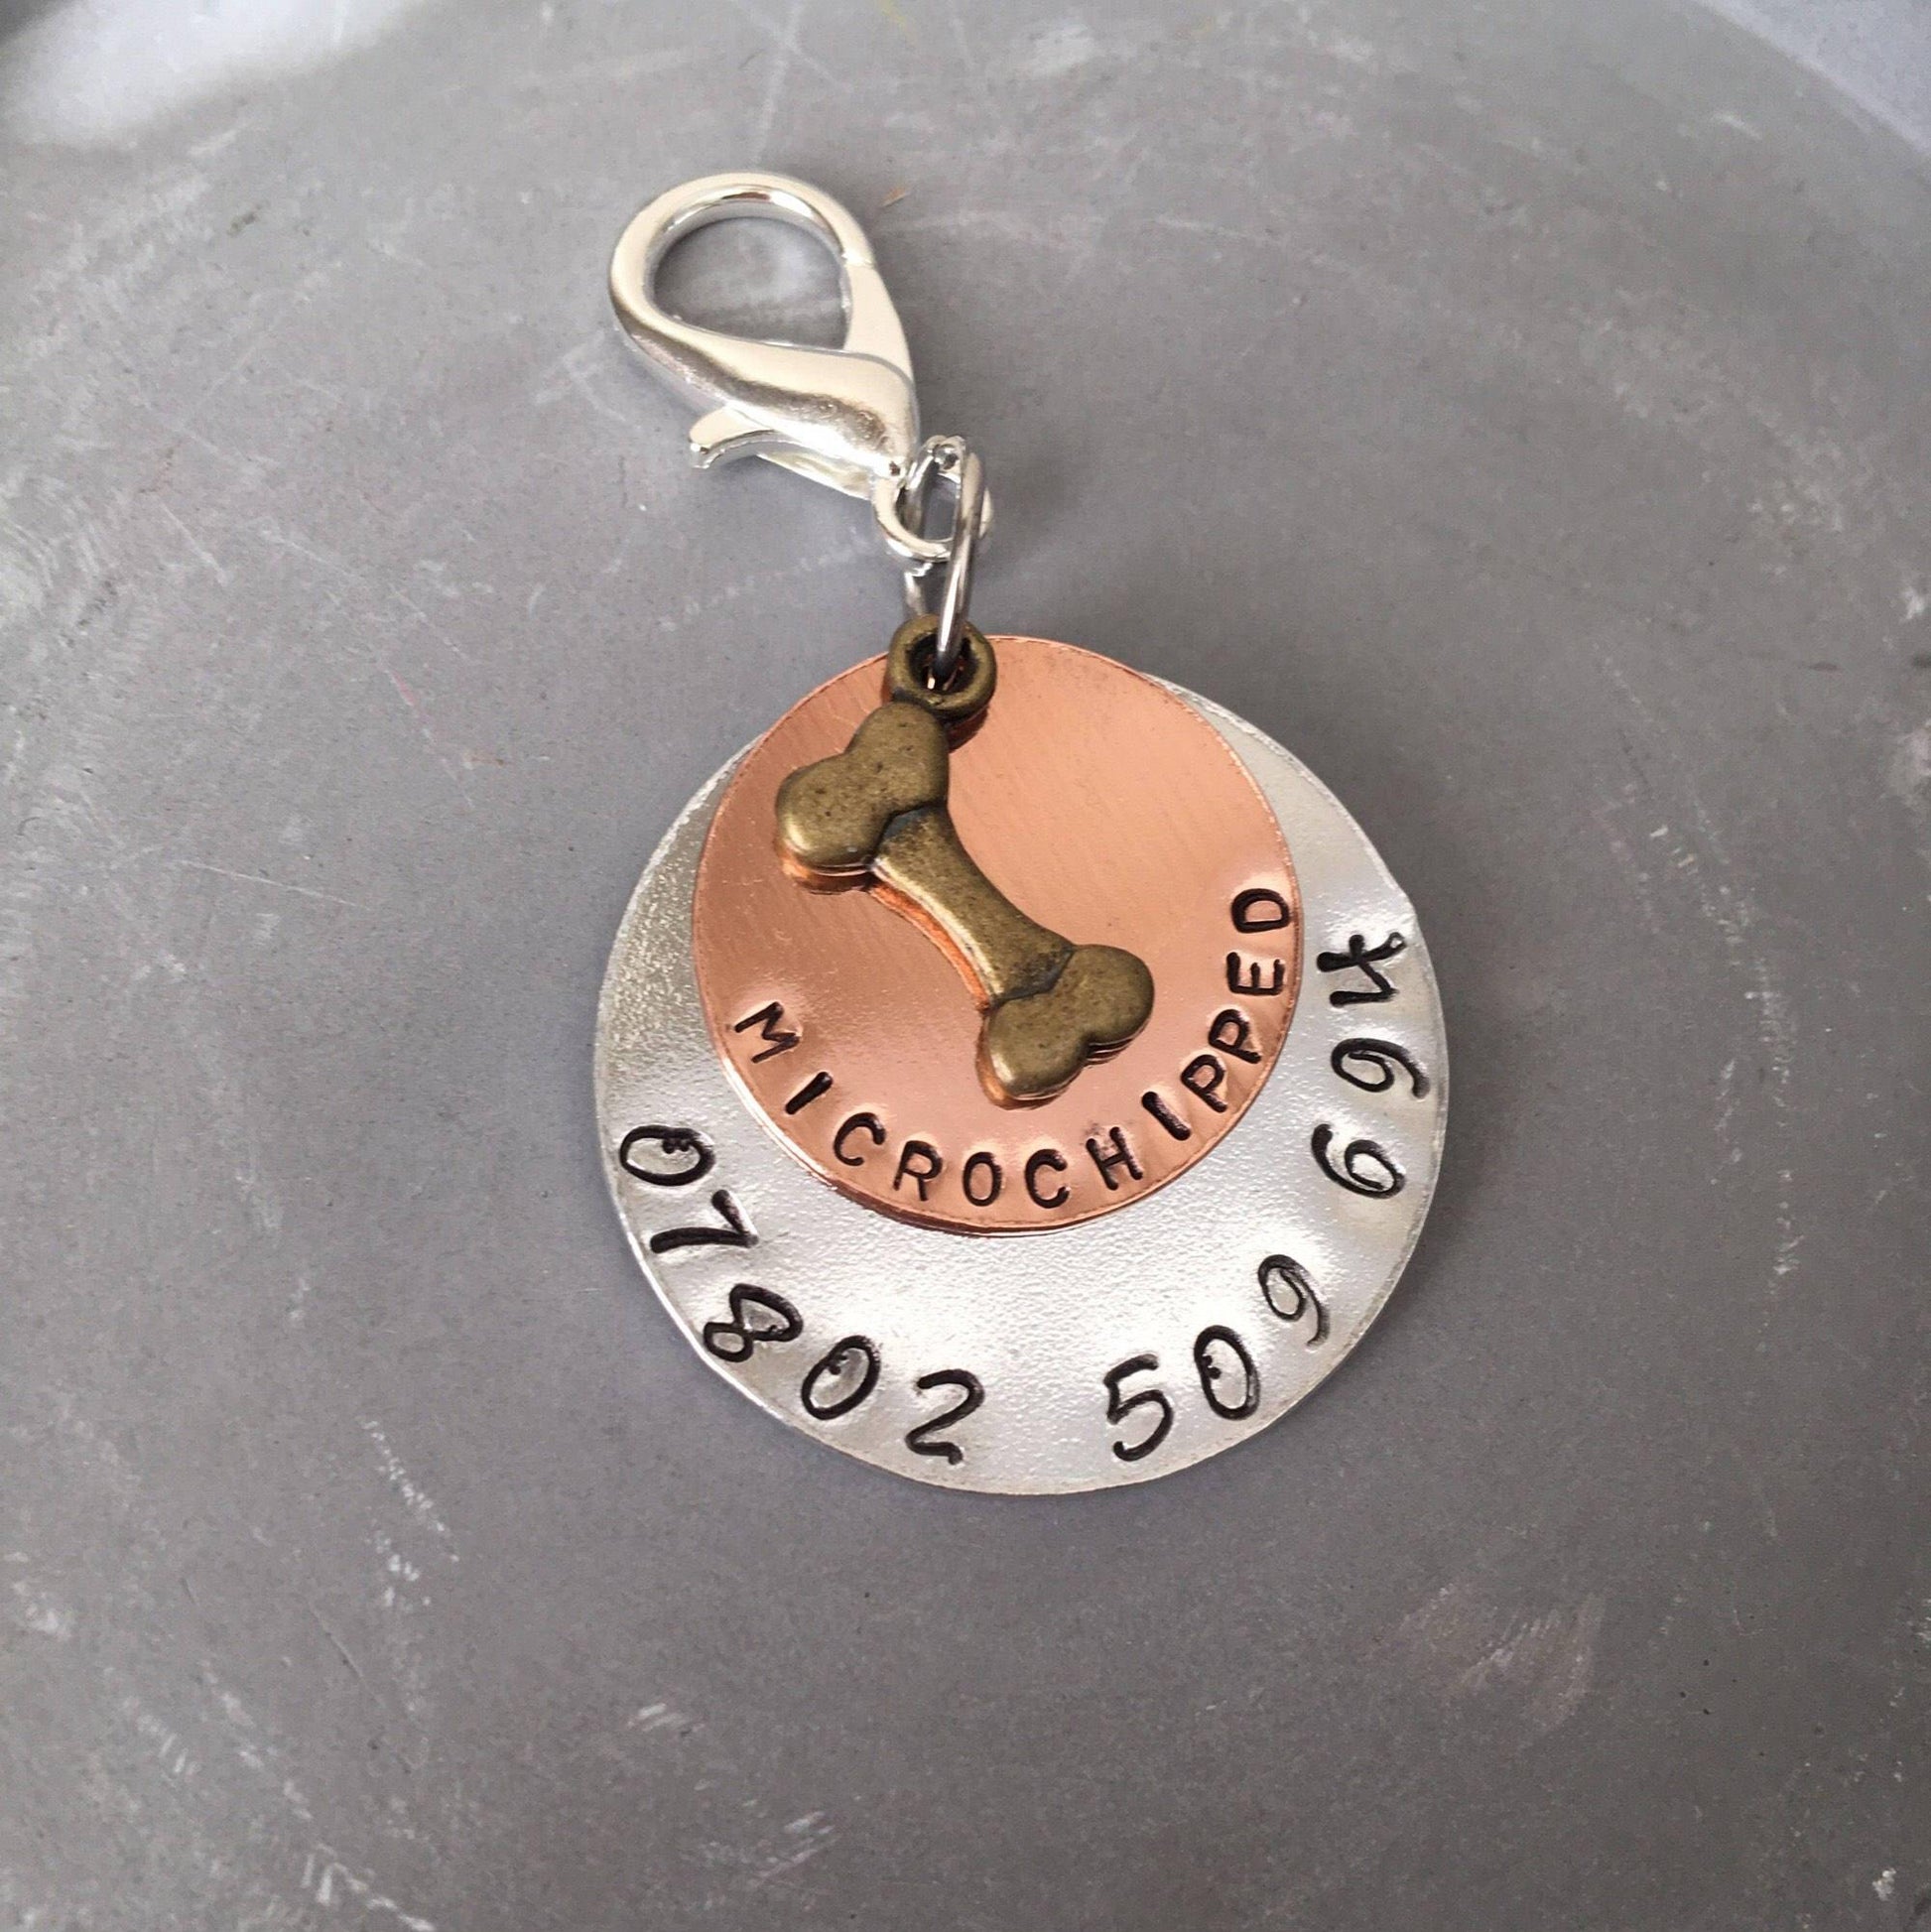 Dog Tag, Pet Tag, Pet ID Tag, Dog ID Tag, Custom Dog Tag, Personalised Pet Tag, Pet Jewellery, Dog Accessories - The Little Stamping Co.